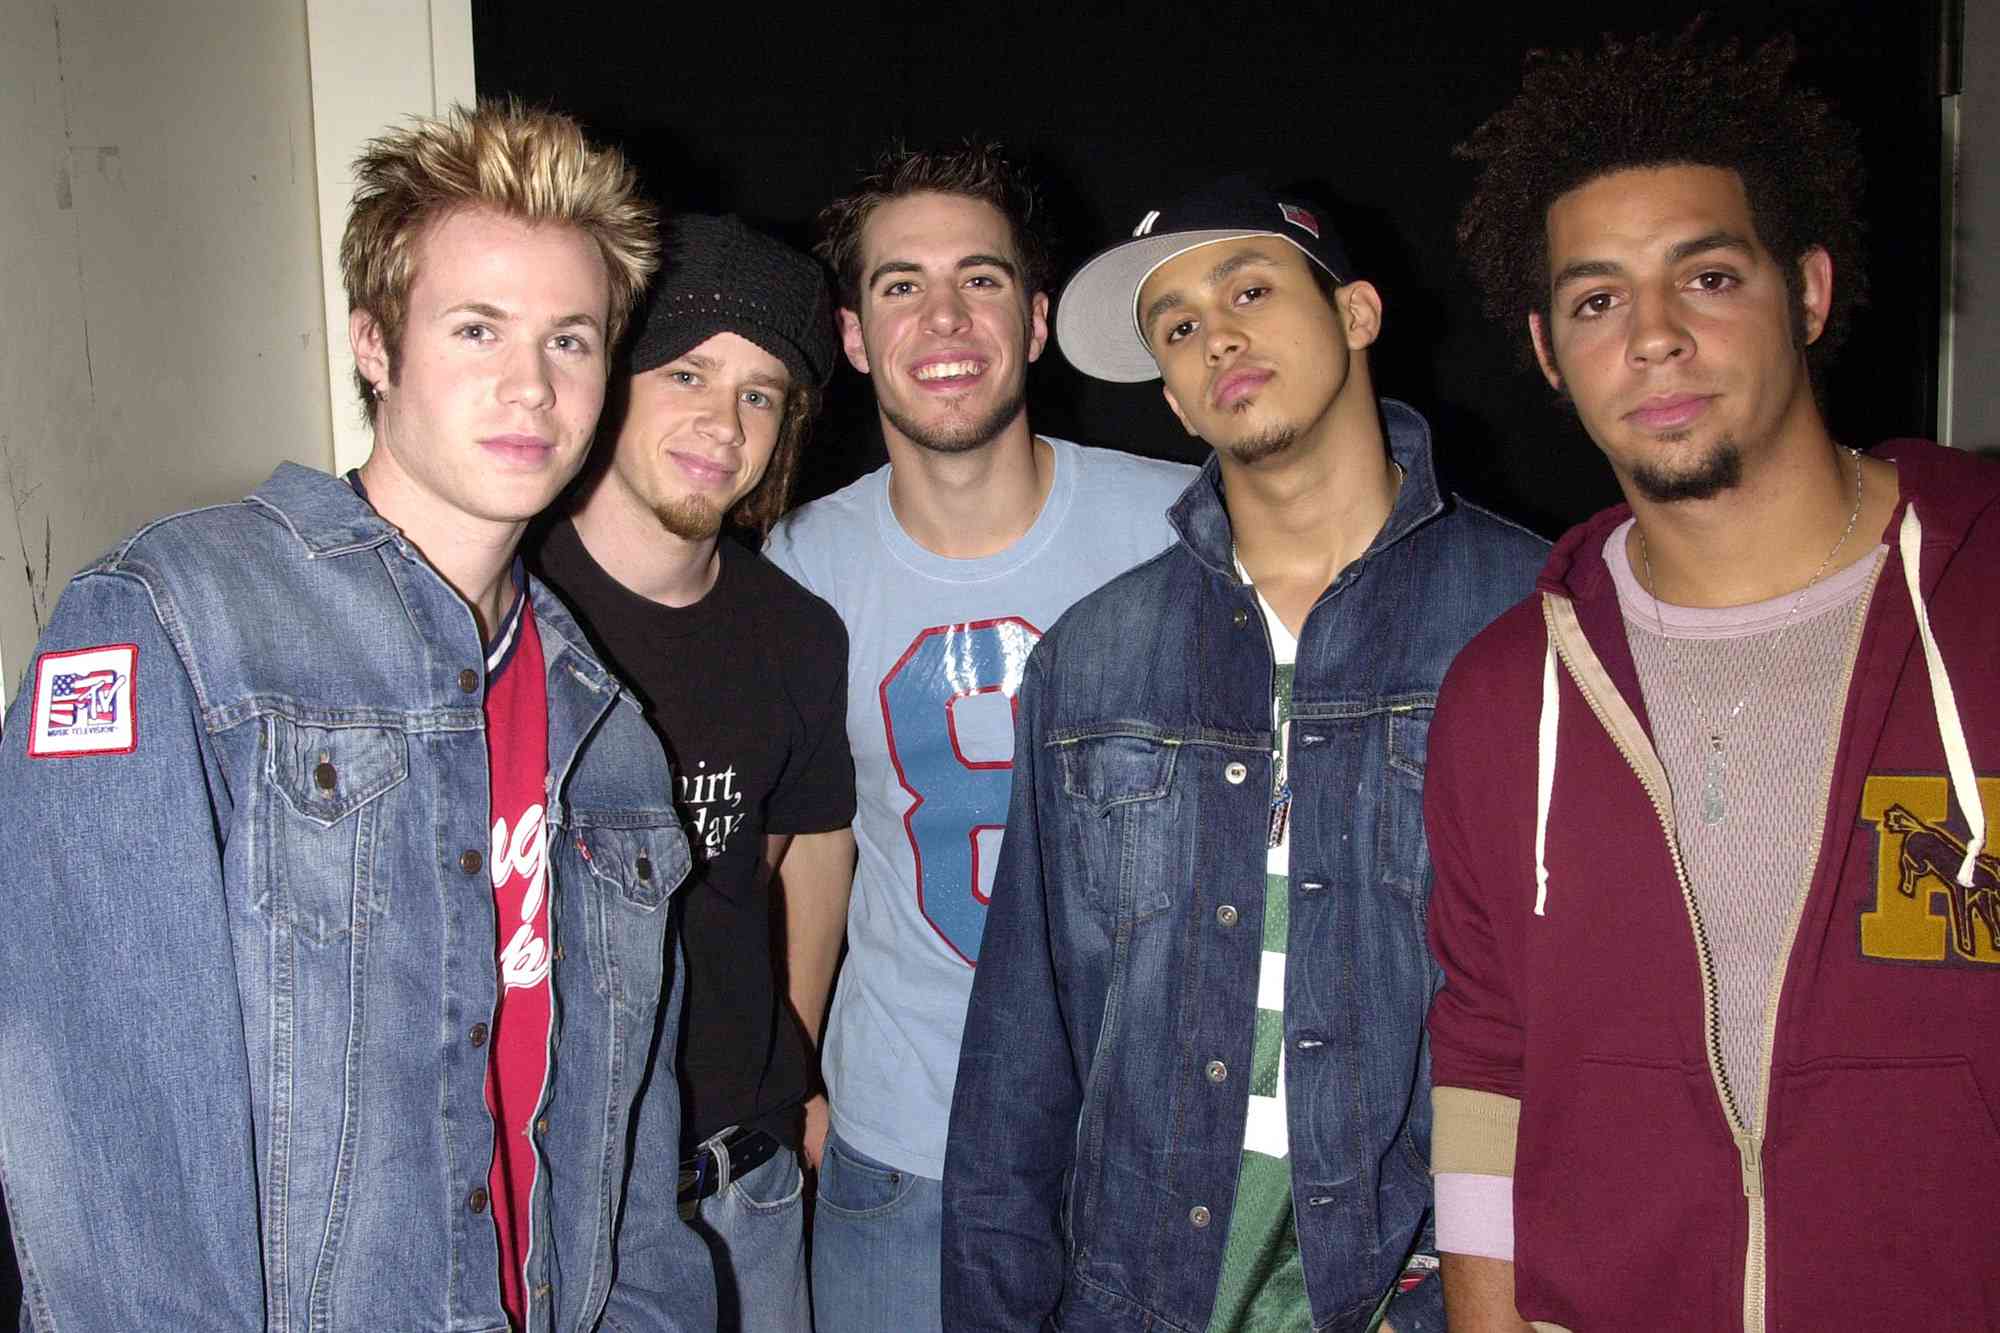 10 Boy Bands of the '90s You Probably Haven't Thought About in a While